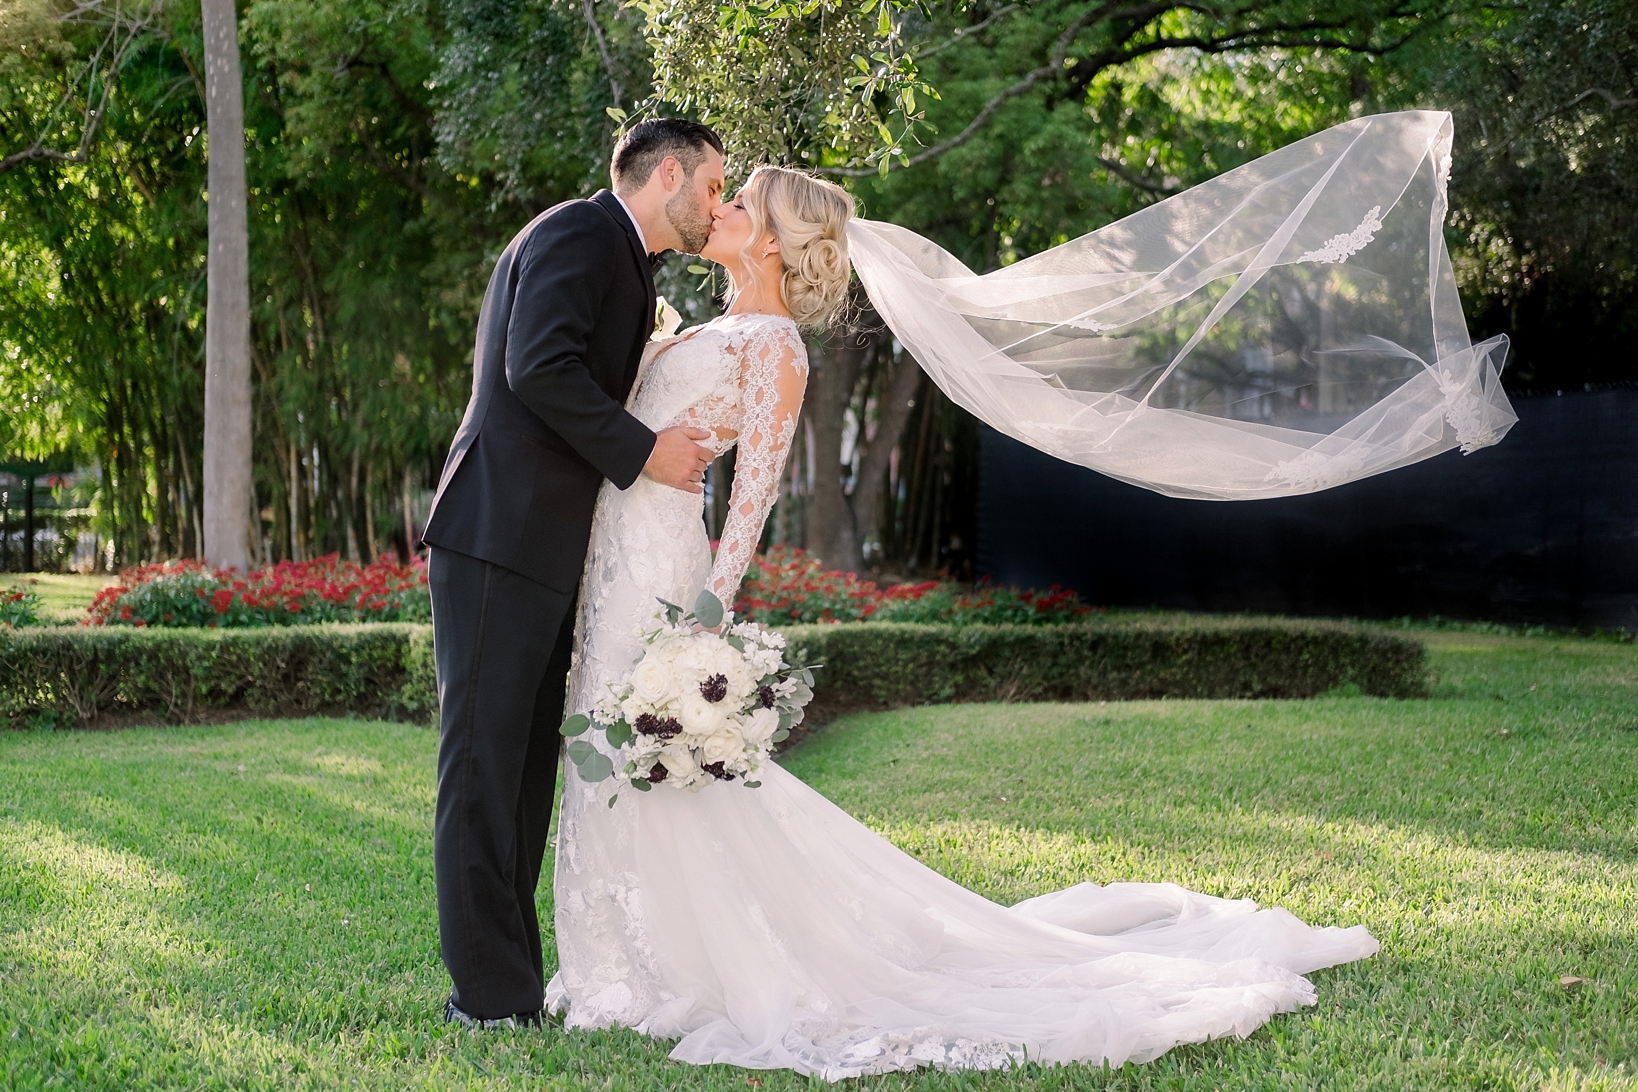 The Bride and Groom share a kiss in the gardens of the University of Tampa as the wind blows the Bride's veil by Sarah & Ben Photography